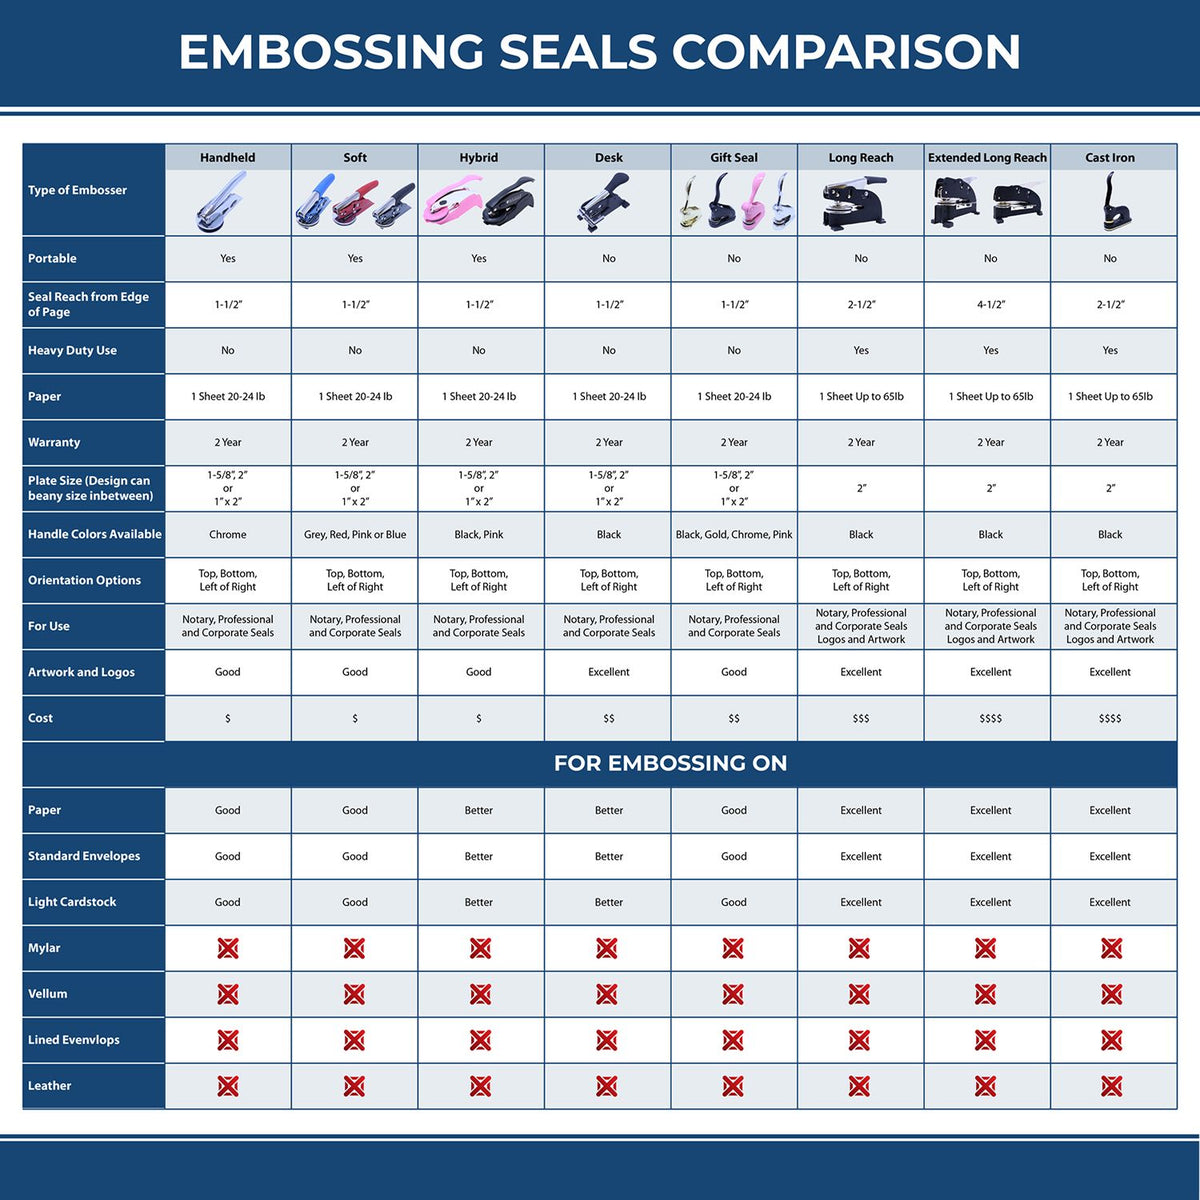 A comparison chart for the different types of mount models available for the Gift Alaska Engineer Seal